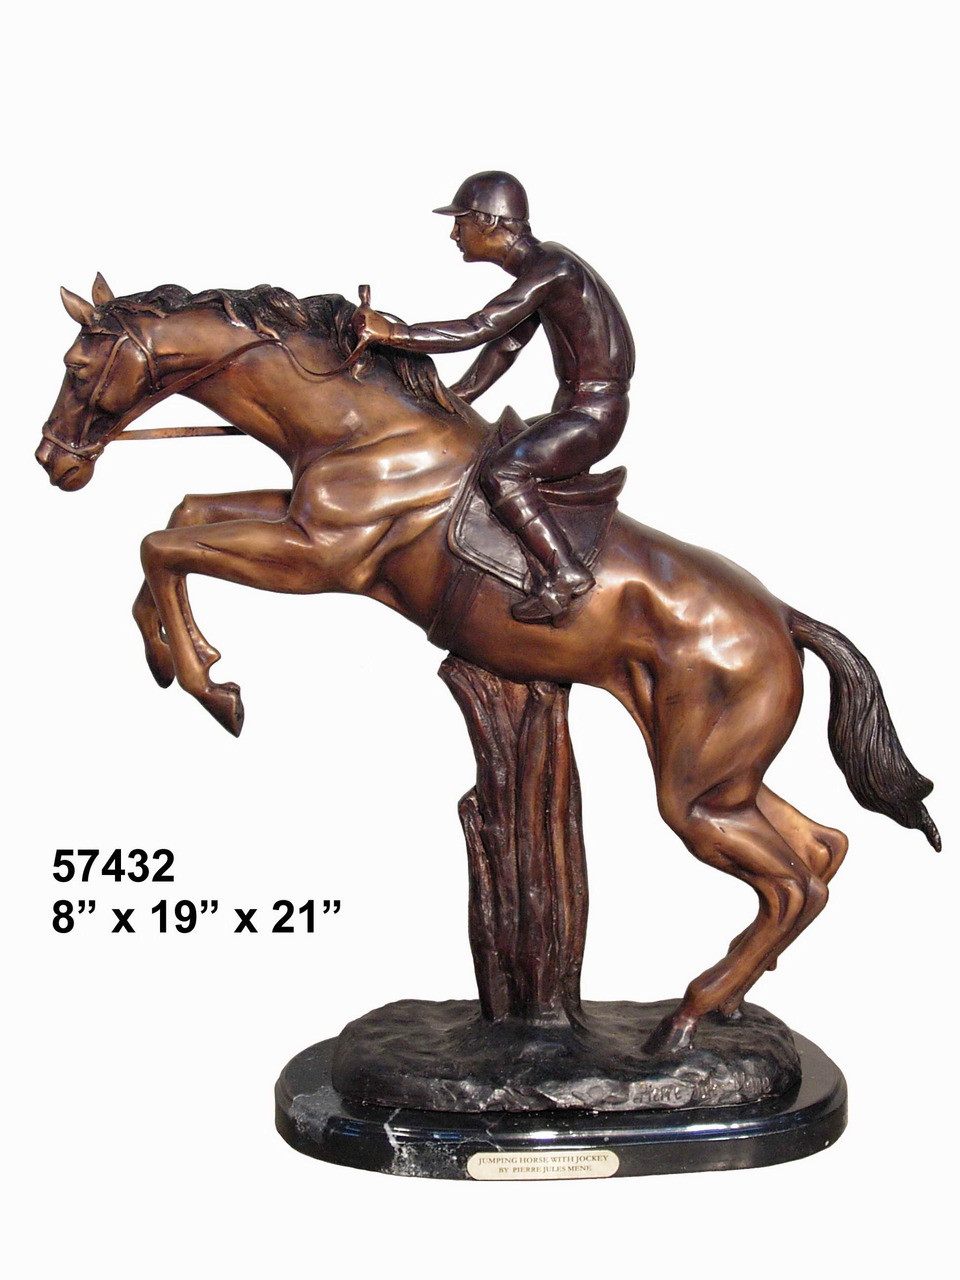 Shop now for the best bronze sculpture, statue and fountain buying  experience on the Internet I Bronze West Imports